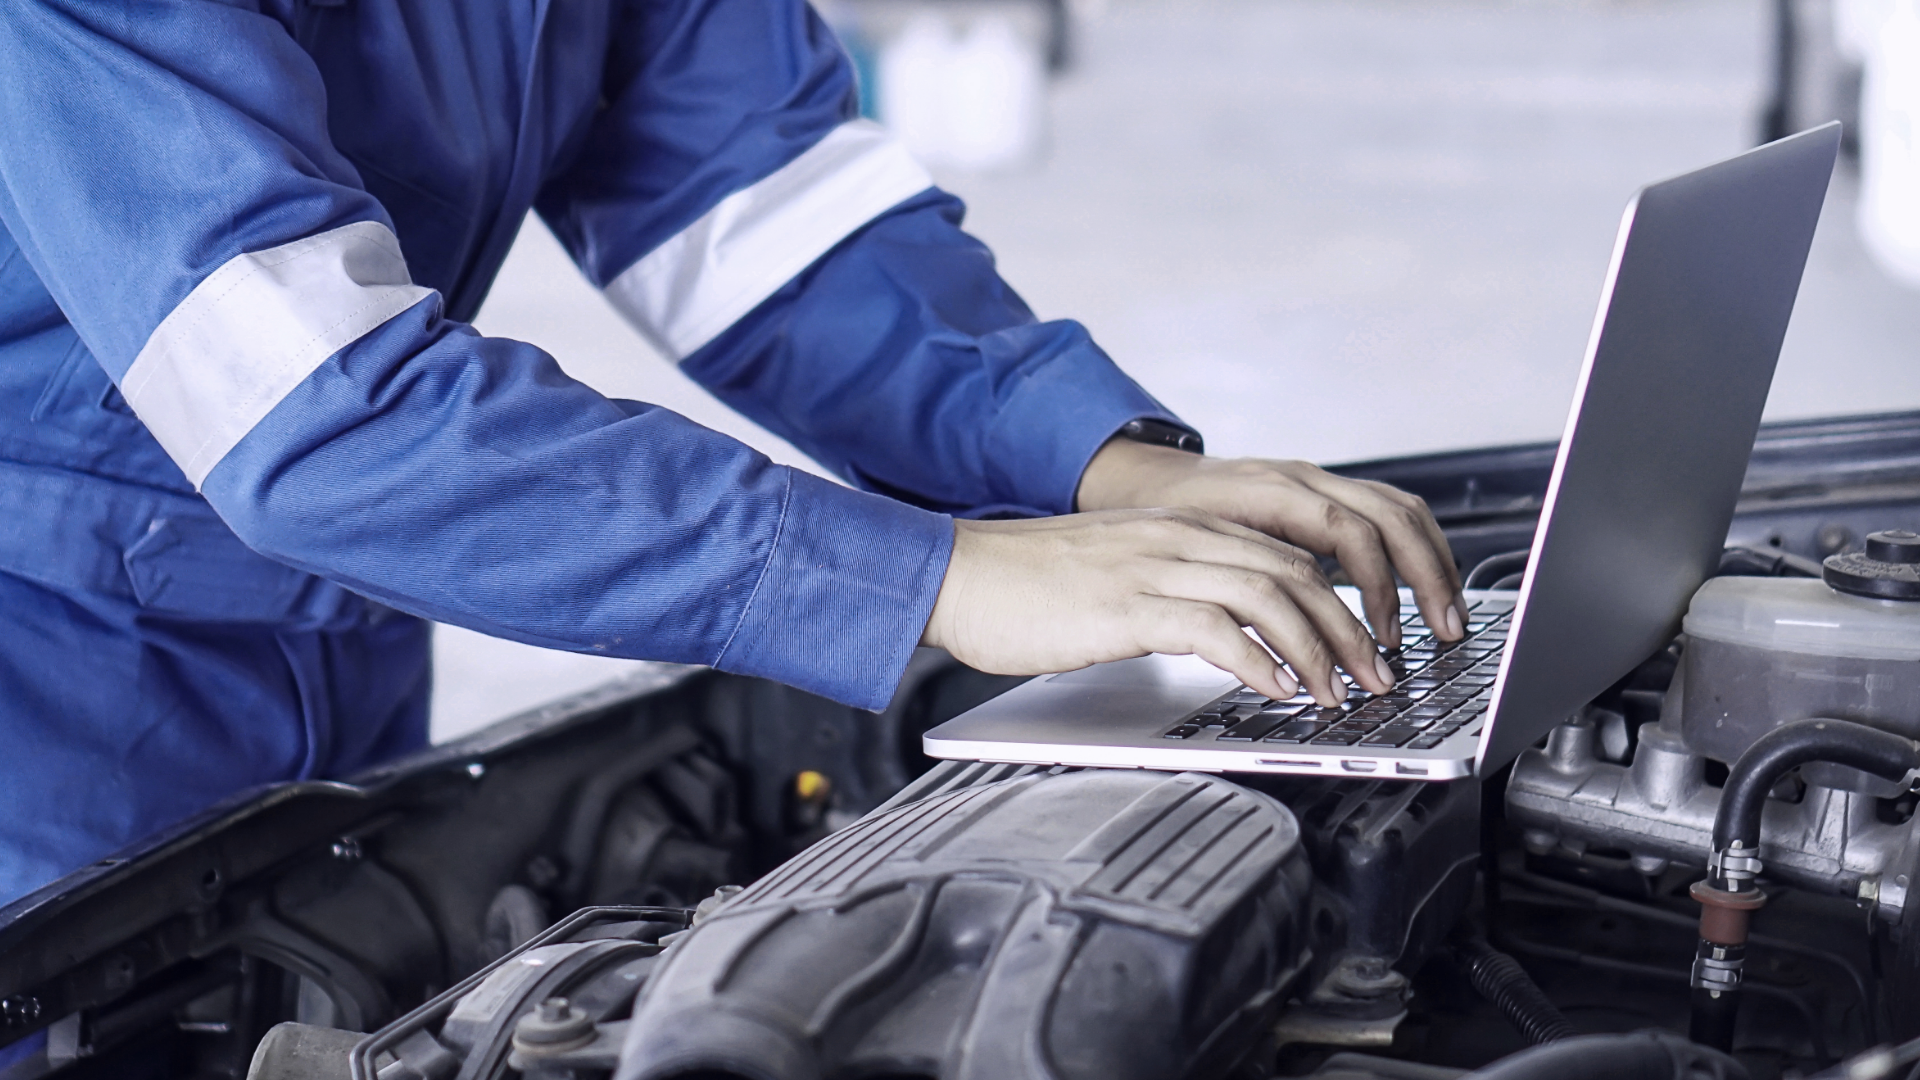 Delphi Technologies expert using a laptop which is resting on top of the exposed engine of a vehicle.